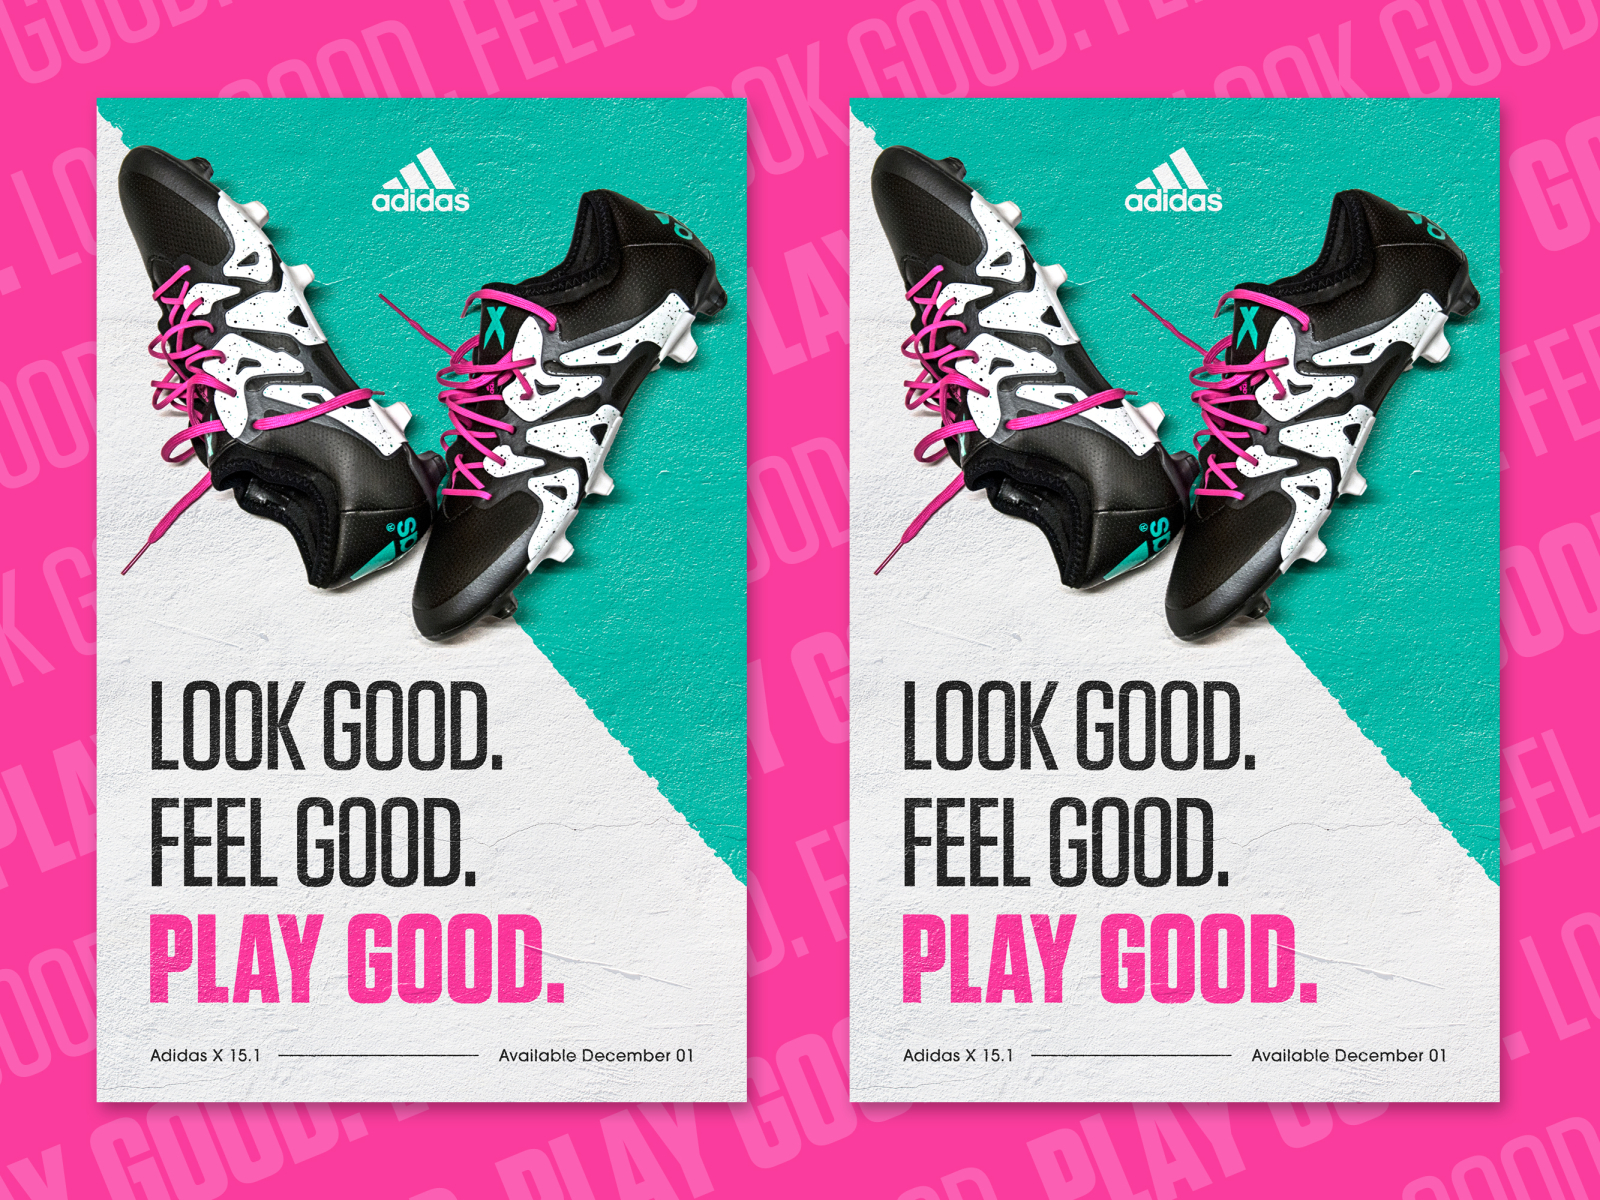 Adidas Football designs, themes, templates and downloadable graphic  elements on Dribbble